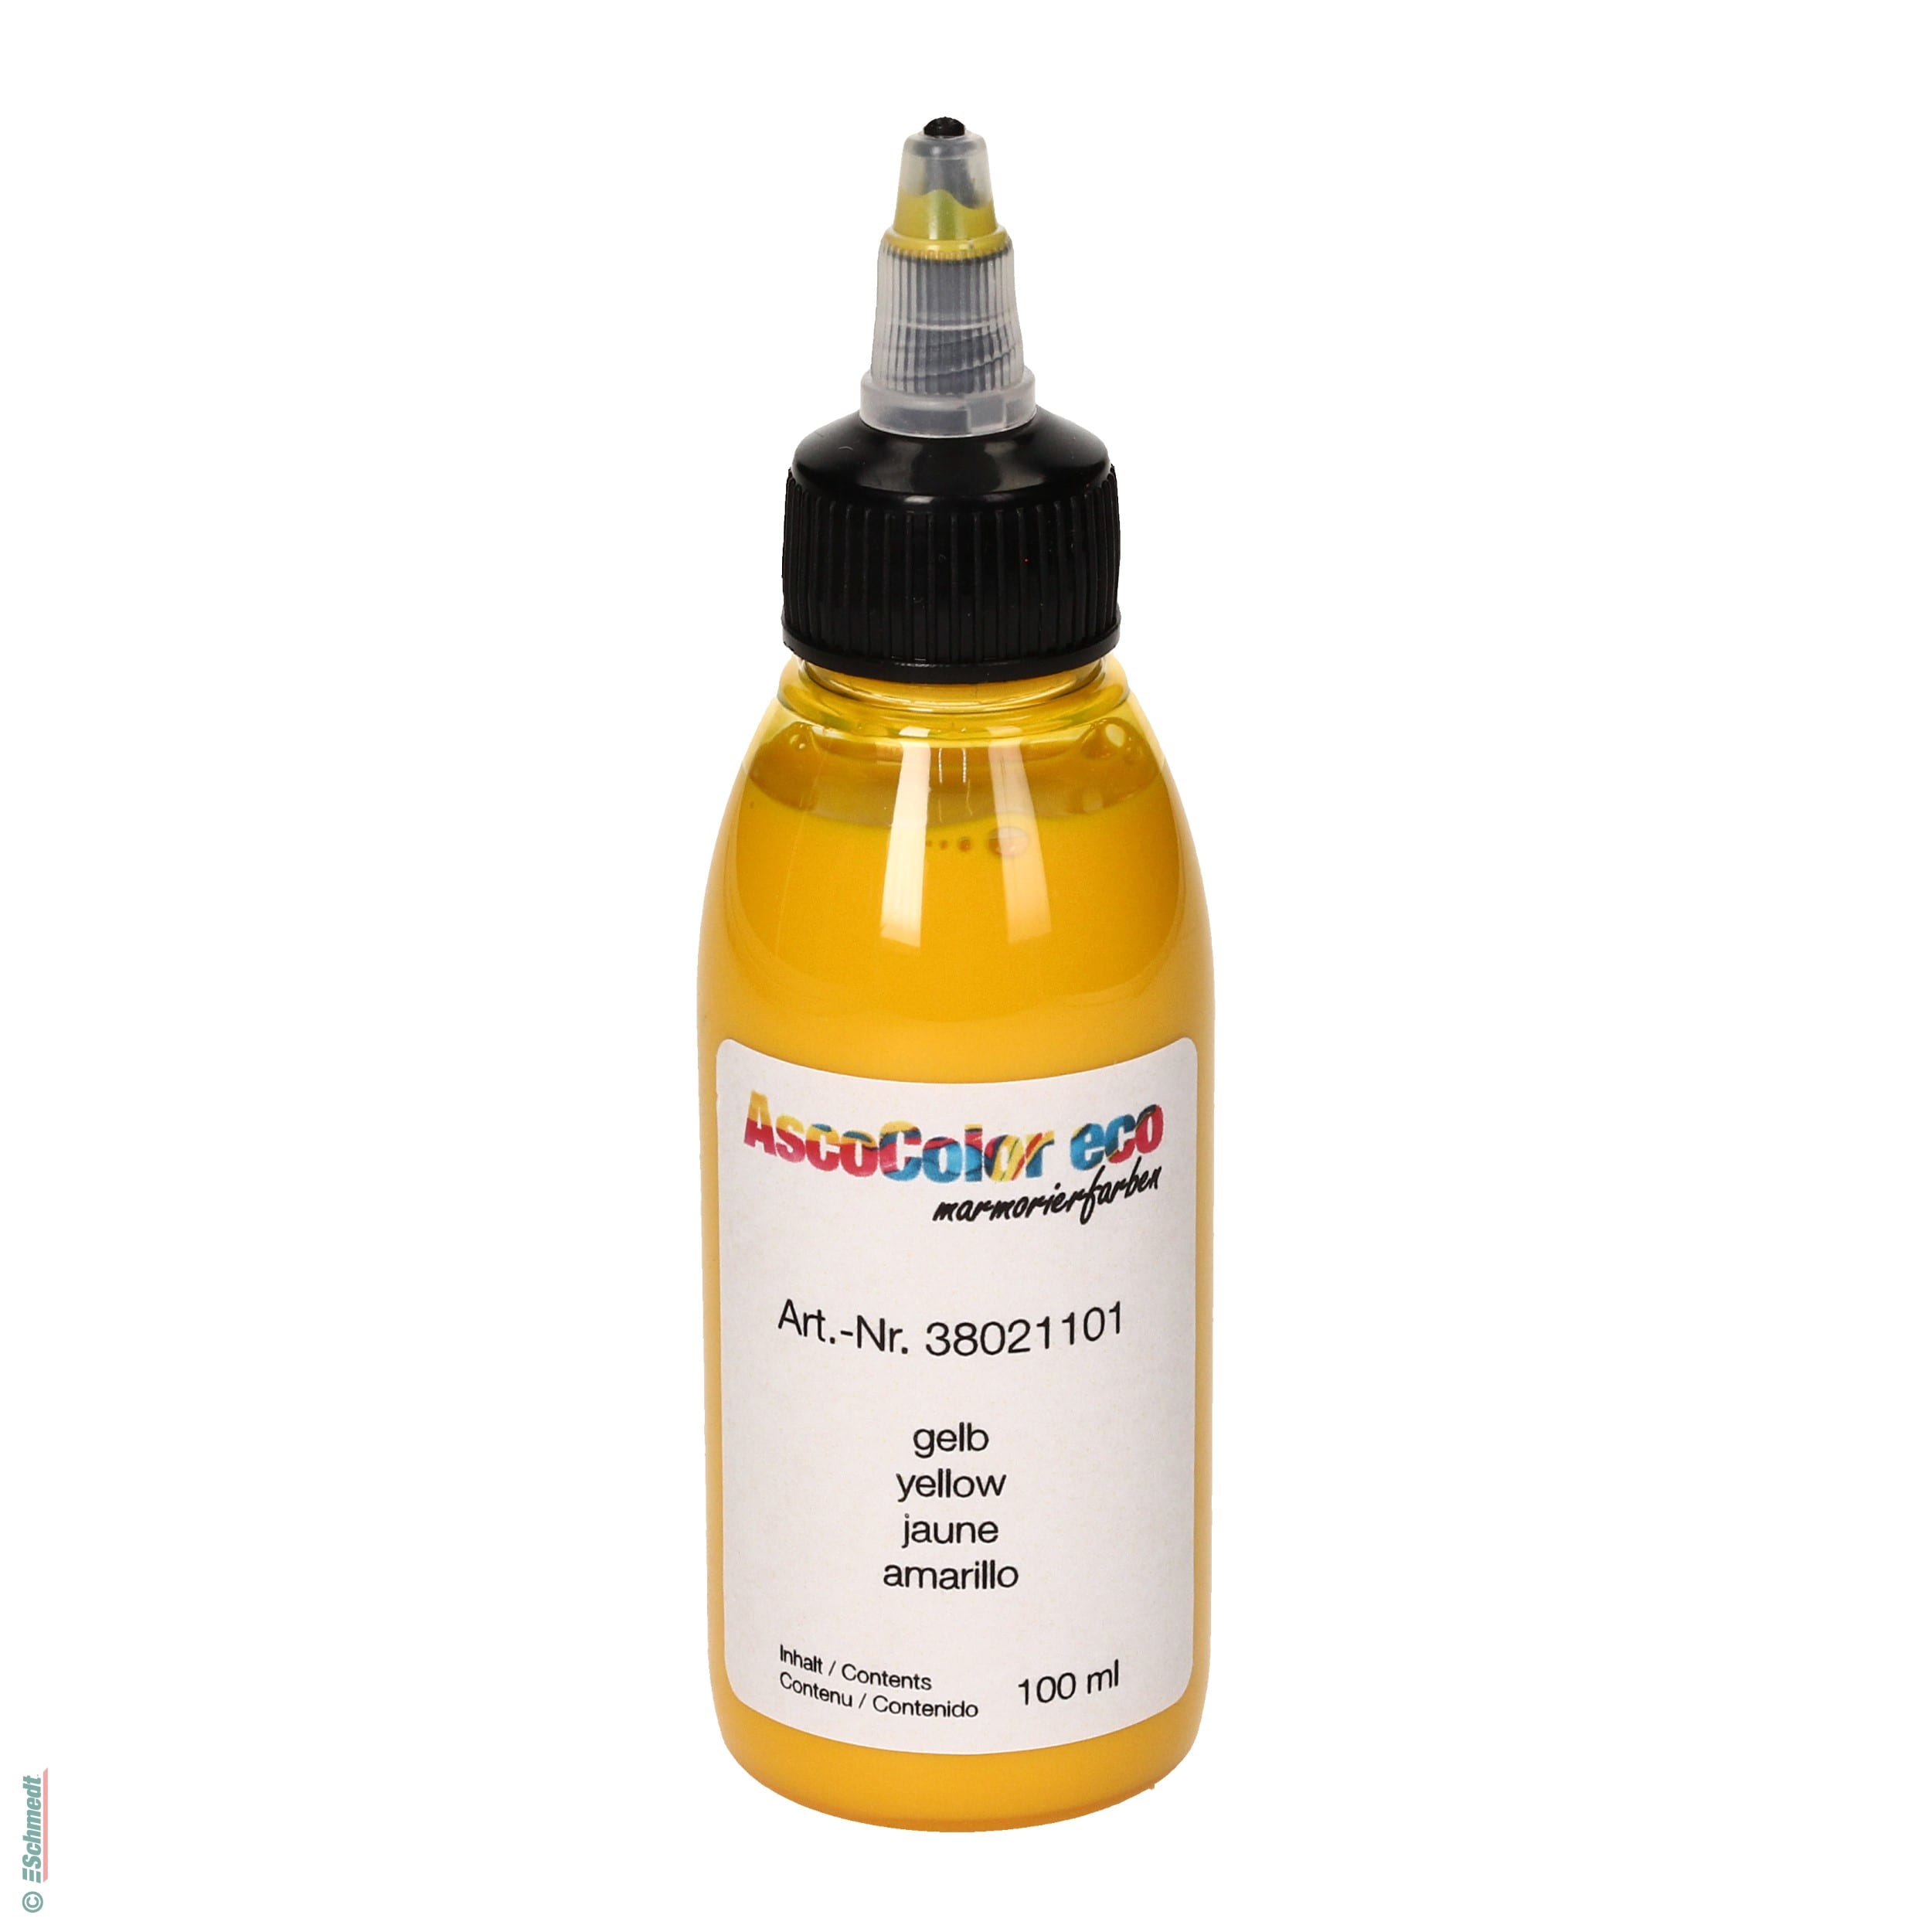 AscoColor eco - Marbling dye - Colour 101 - yellow - Contents Bottle / 100 ml - to produce marbled papers...